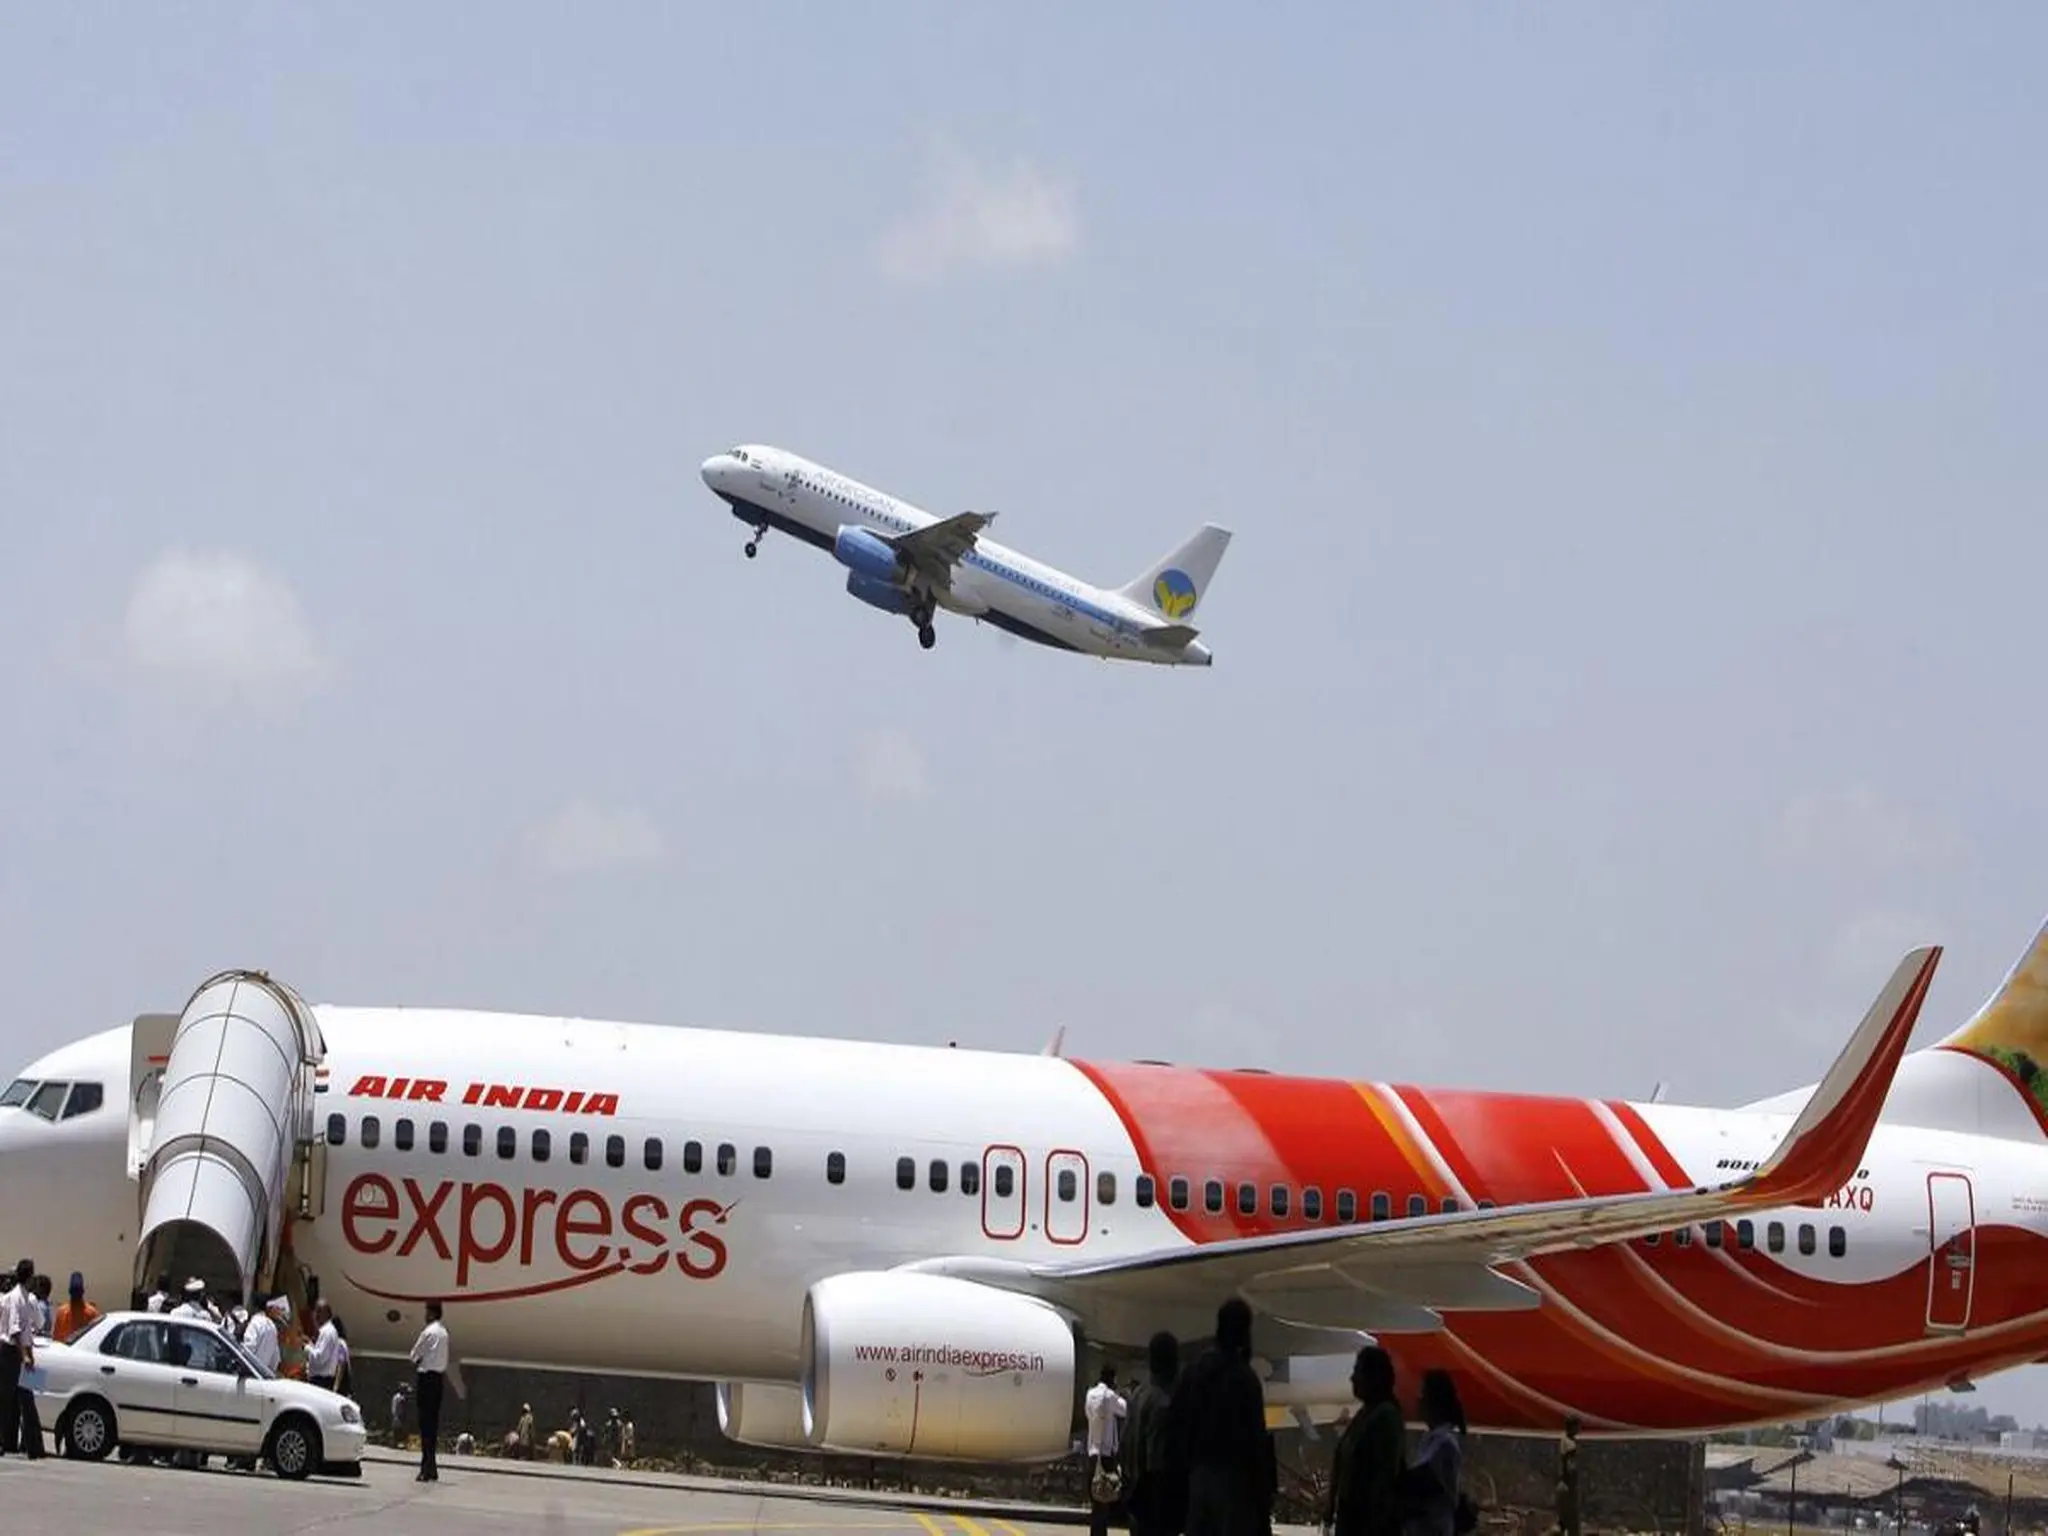 UAE-India flights: Air India Express offers reduced airfares for travelers